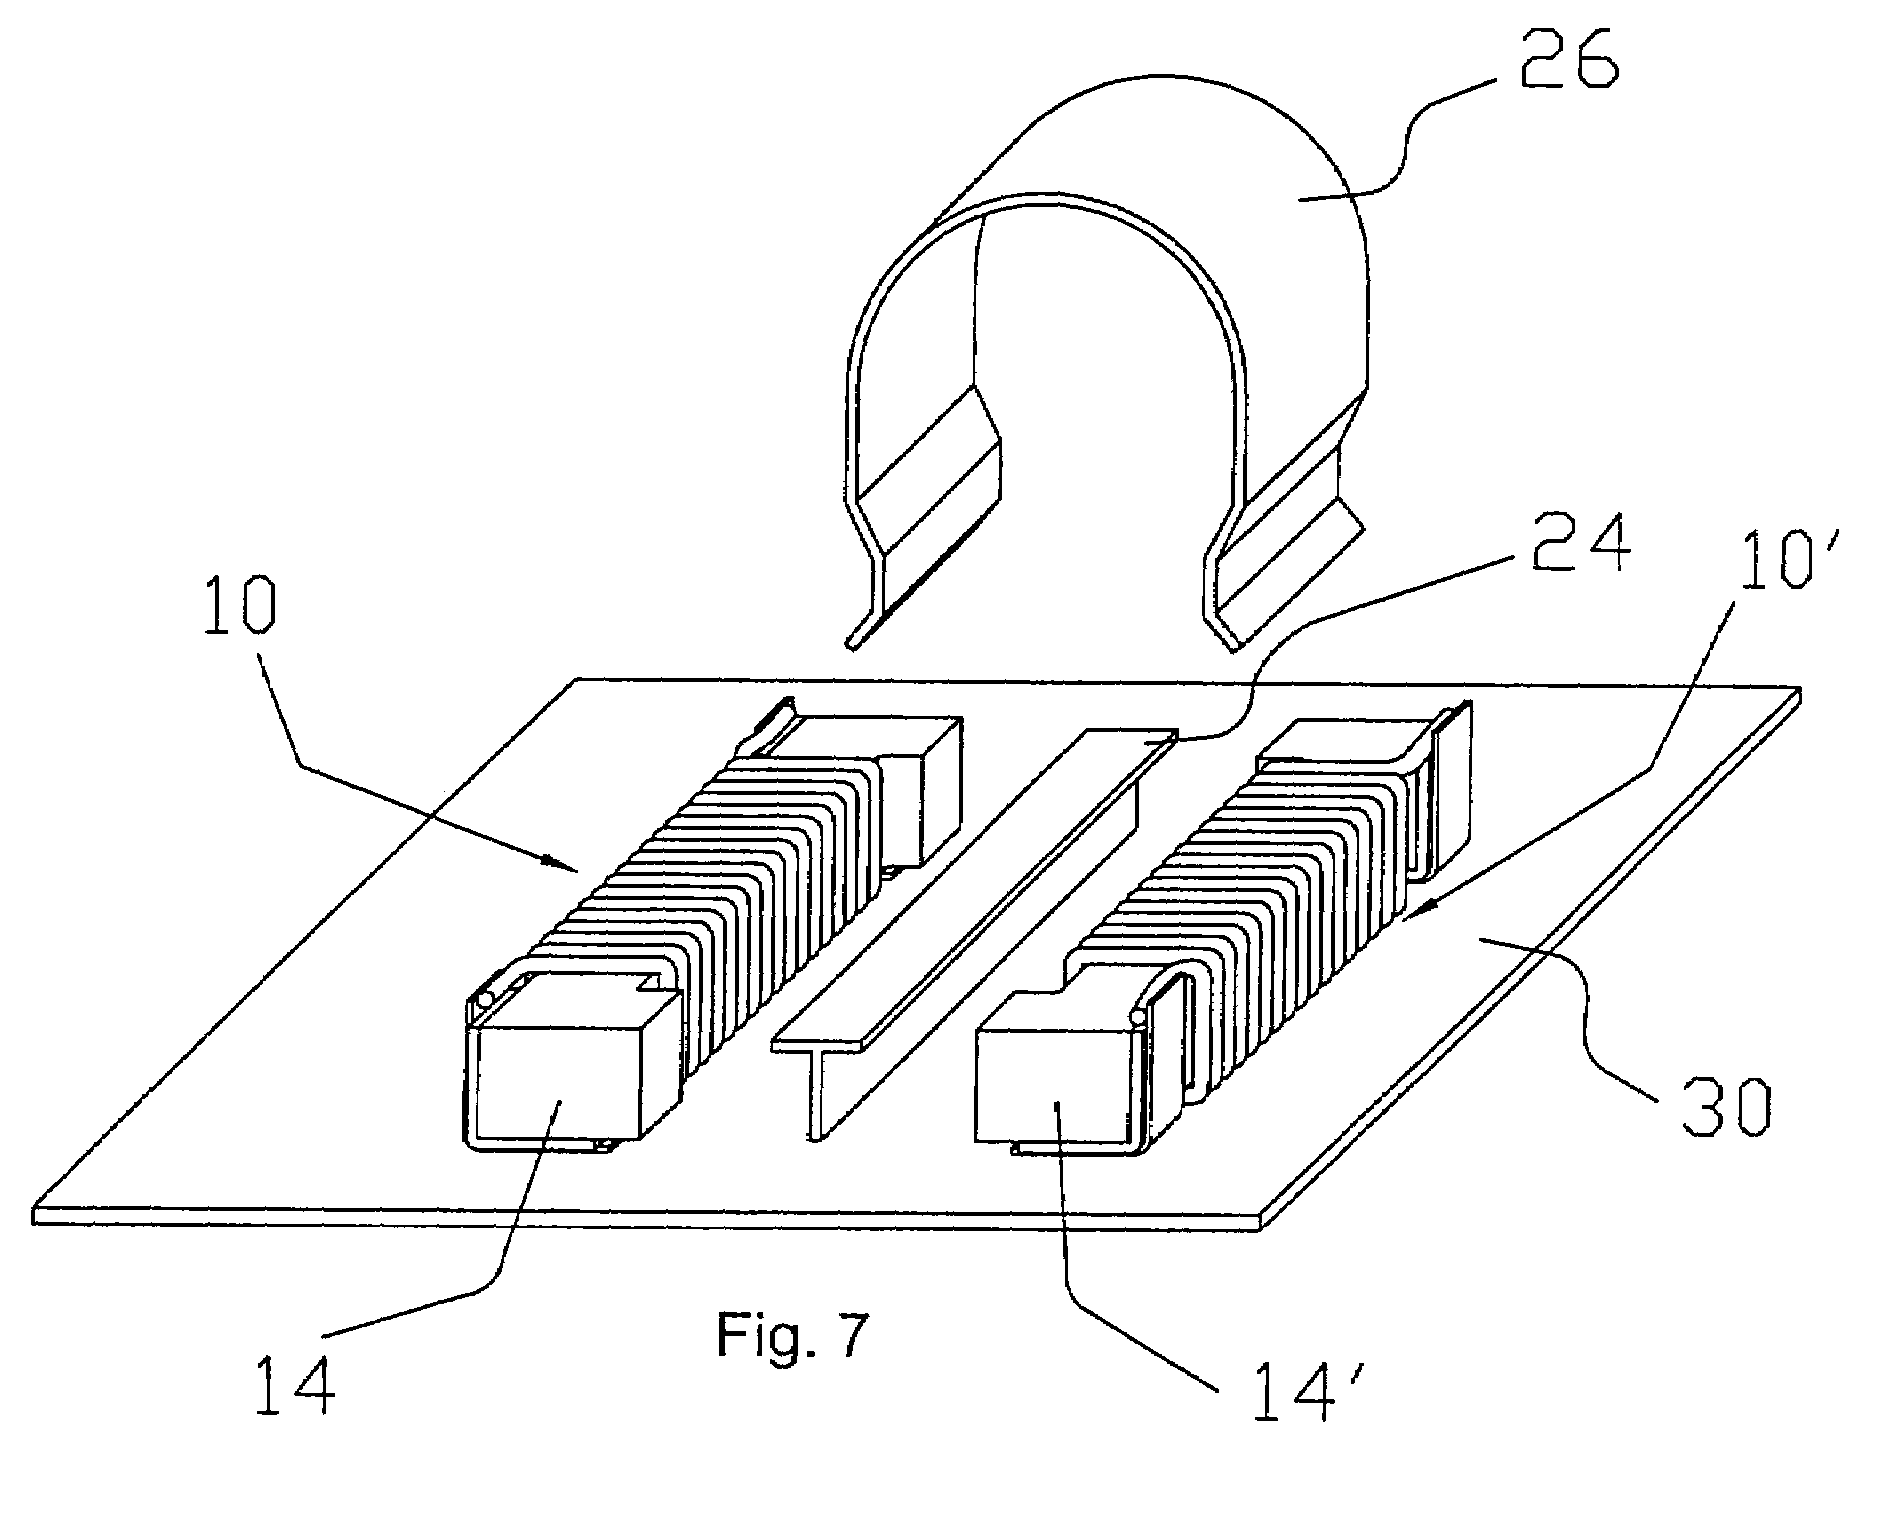 Coil arrangement and method for its manufacture